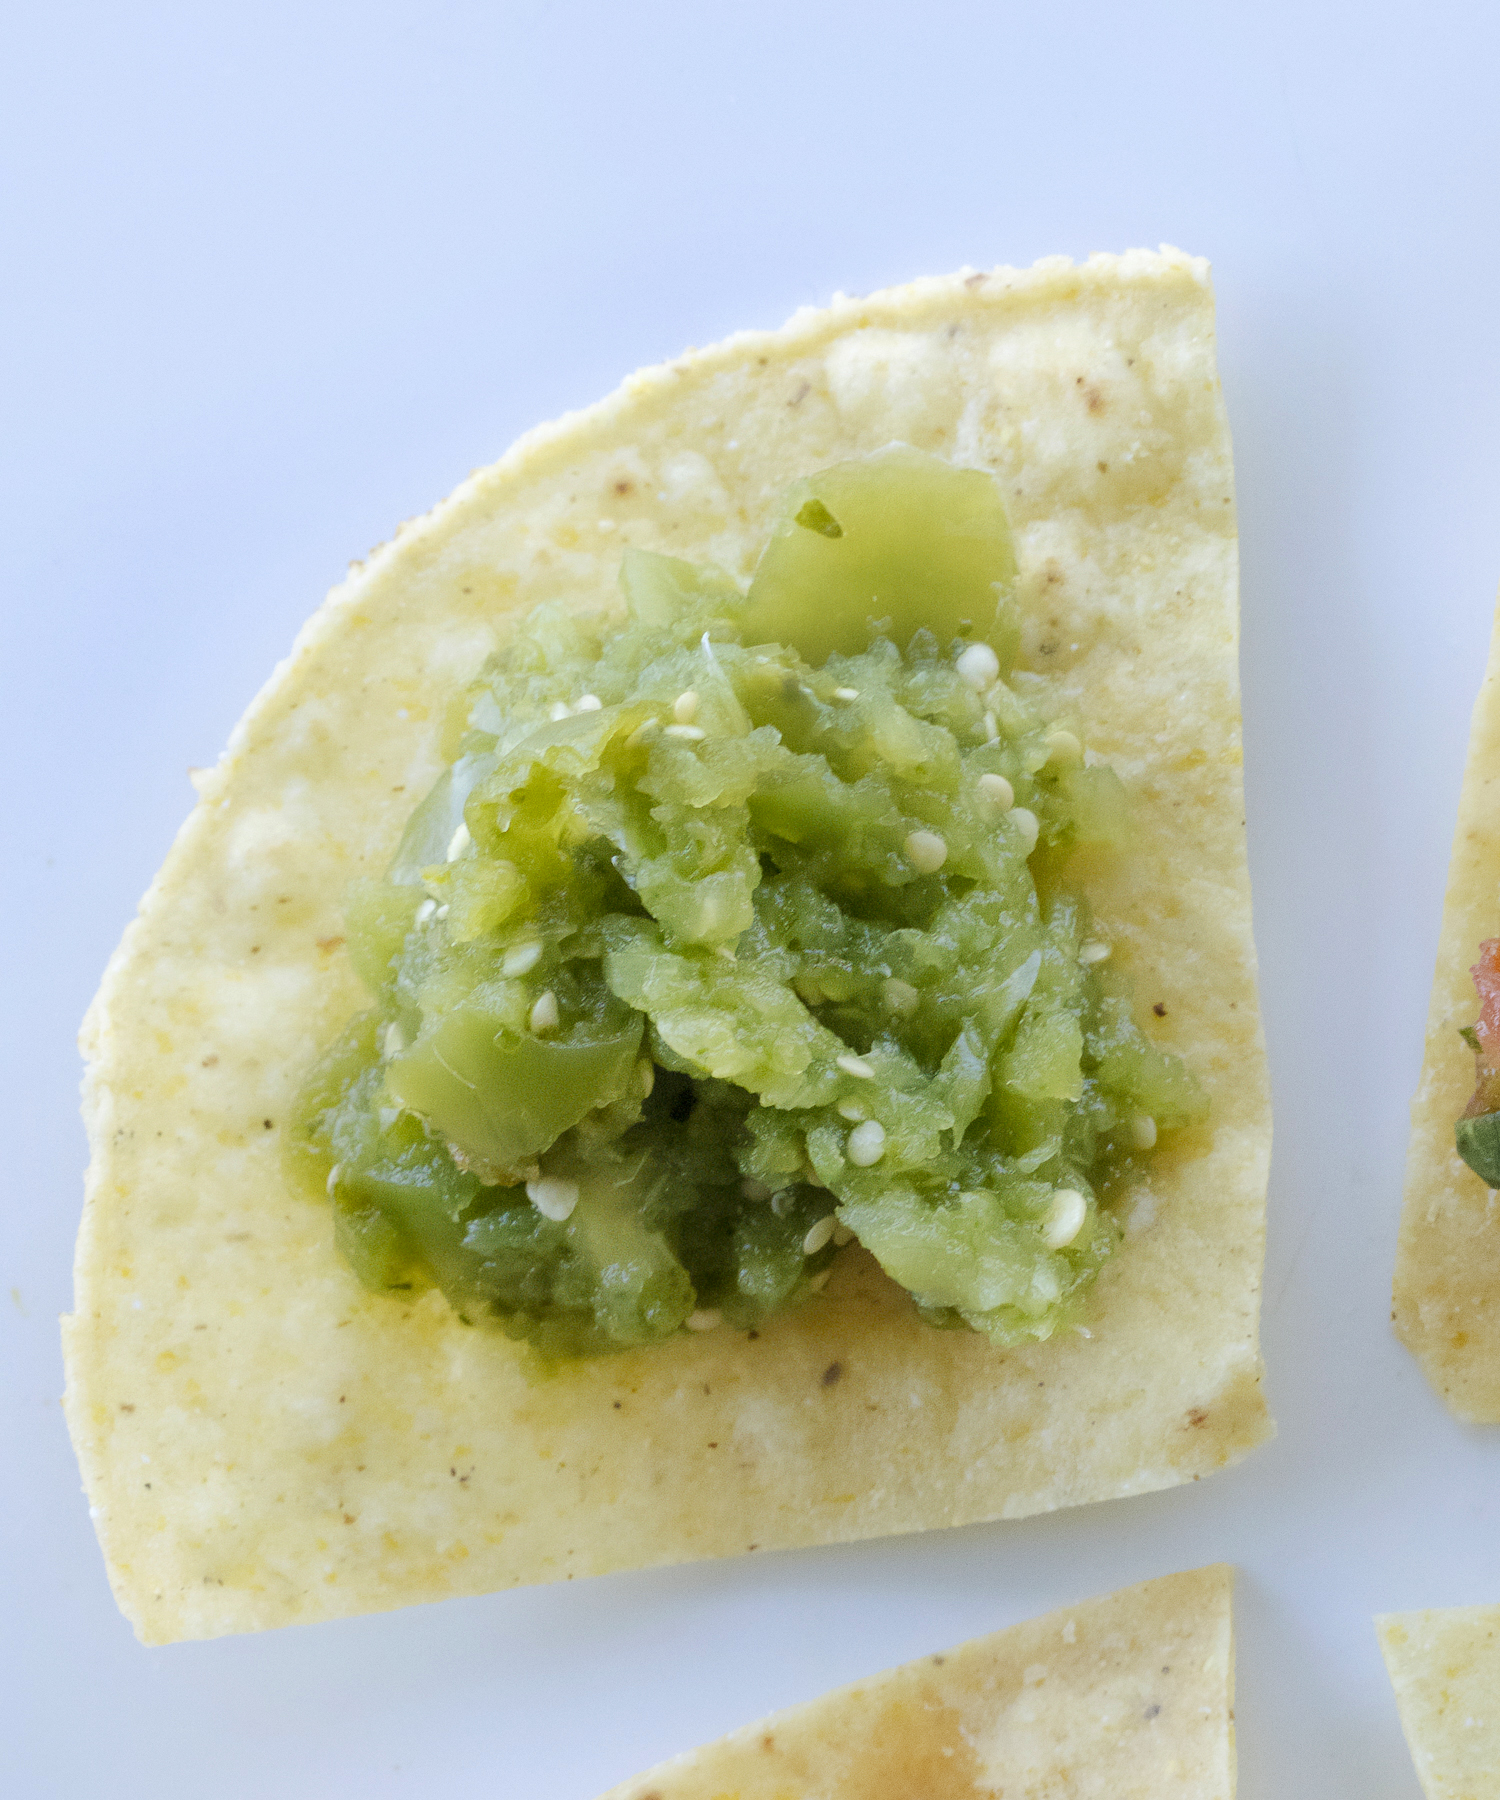 Green tomatillo salsa served on a corn tortillas chip on a bright white background